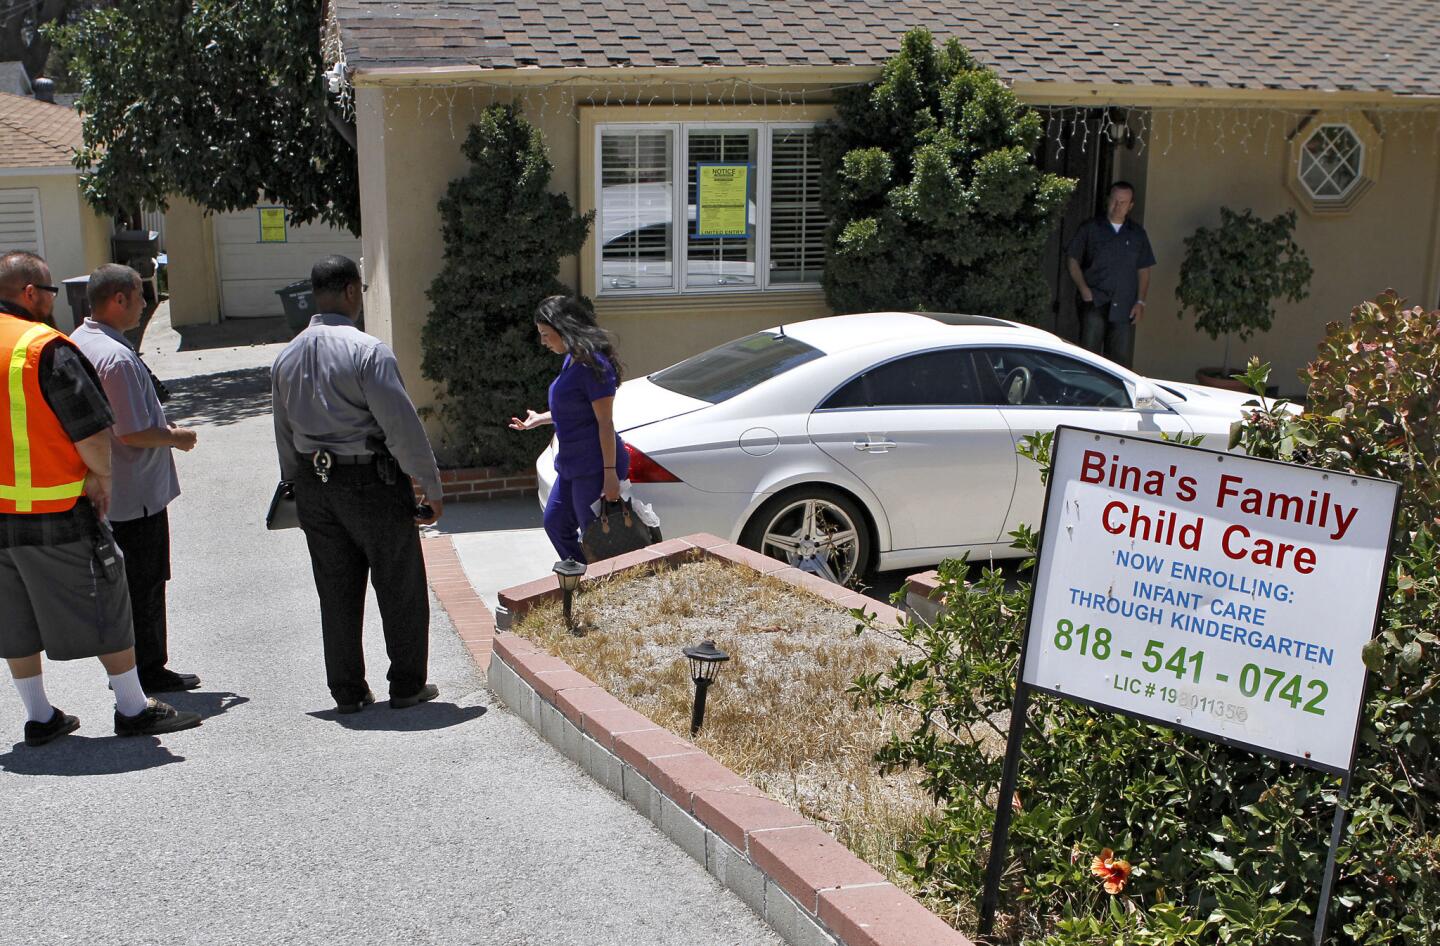 A woman who showed up to get some things out of the house at 3210 Orange Ave. speaks with Glendale Neighborhood Services and Glendale Police Dept. officials after Bina's Family Child Care was shut down at the home in La Crescenta on Wednesday, August 14, 2013. Officials posted a sign that said "LIMITED ENTRY. Occupancy Prohibited. No living, sleeping, cooking allowed. Entry limited for purposes of repair only."